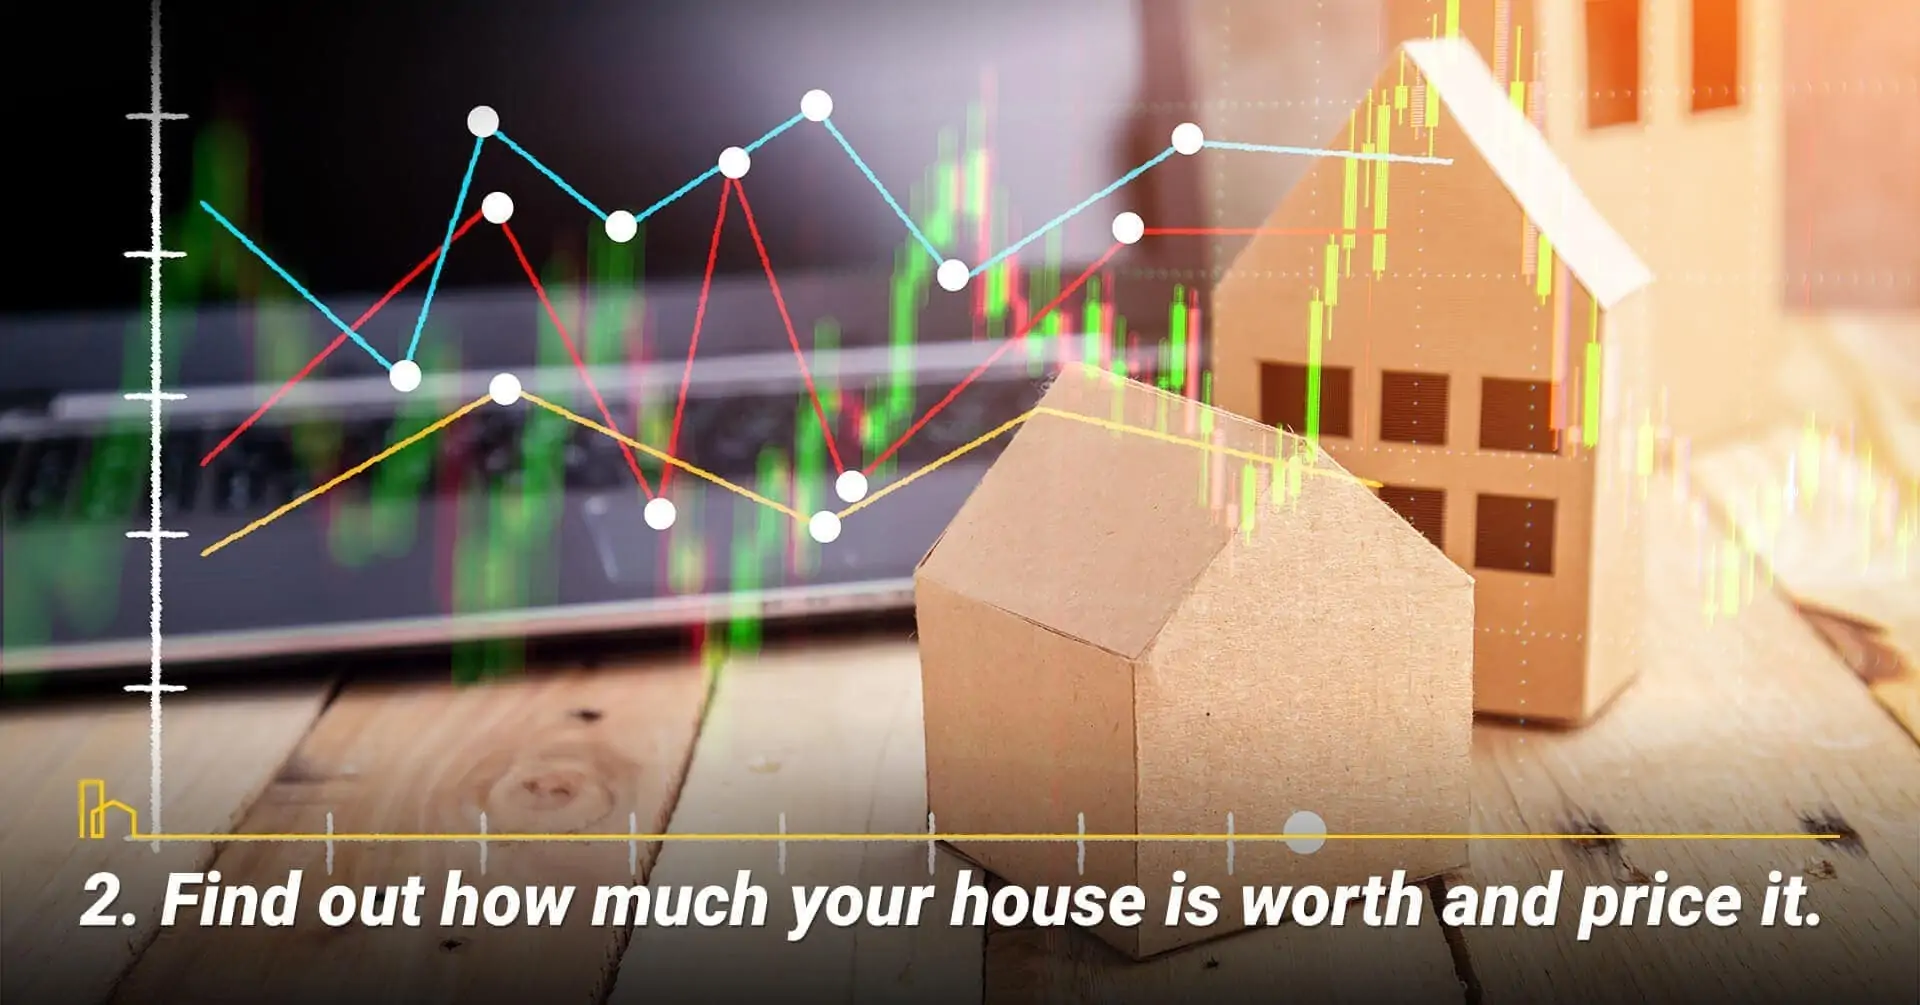 Find out how much your house is worth and price it, price your house appropriately